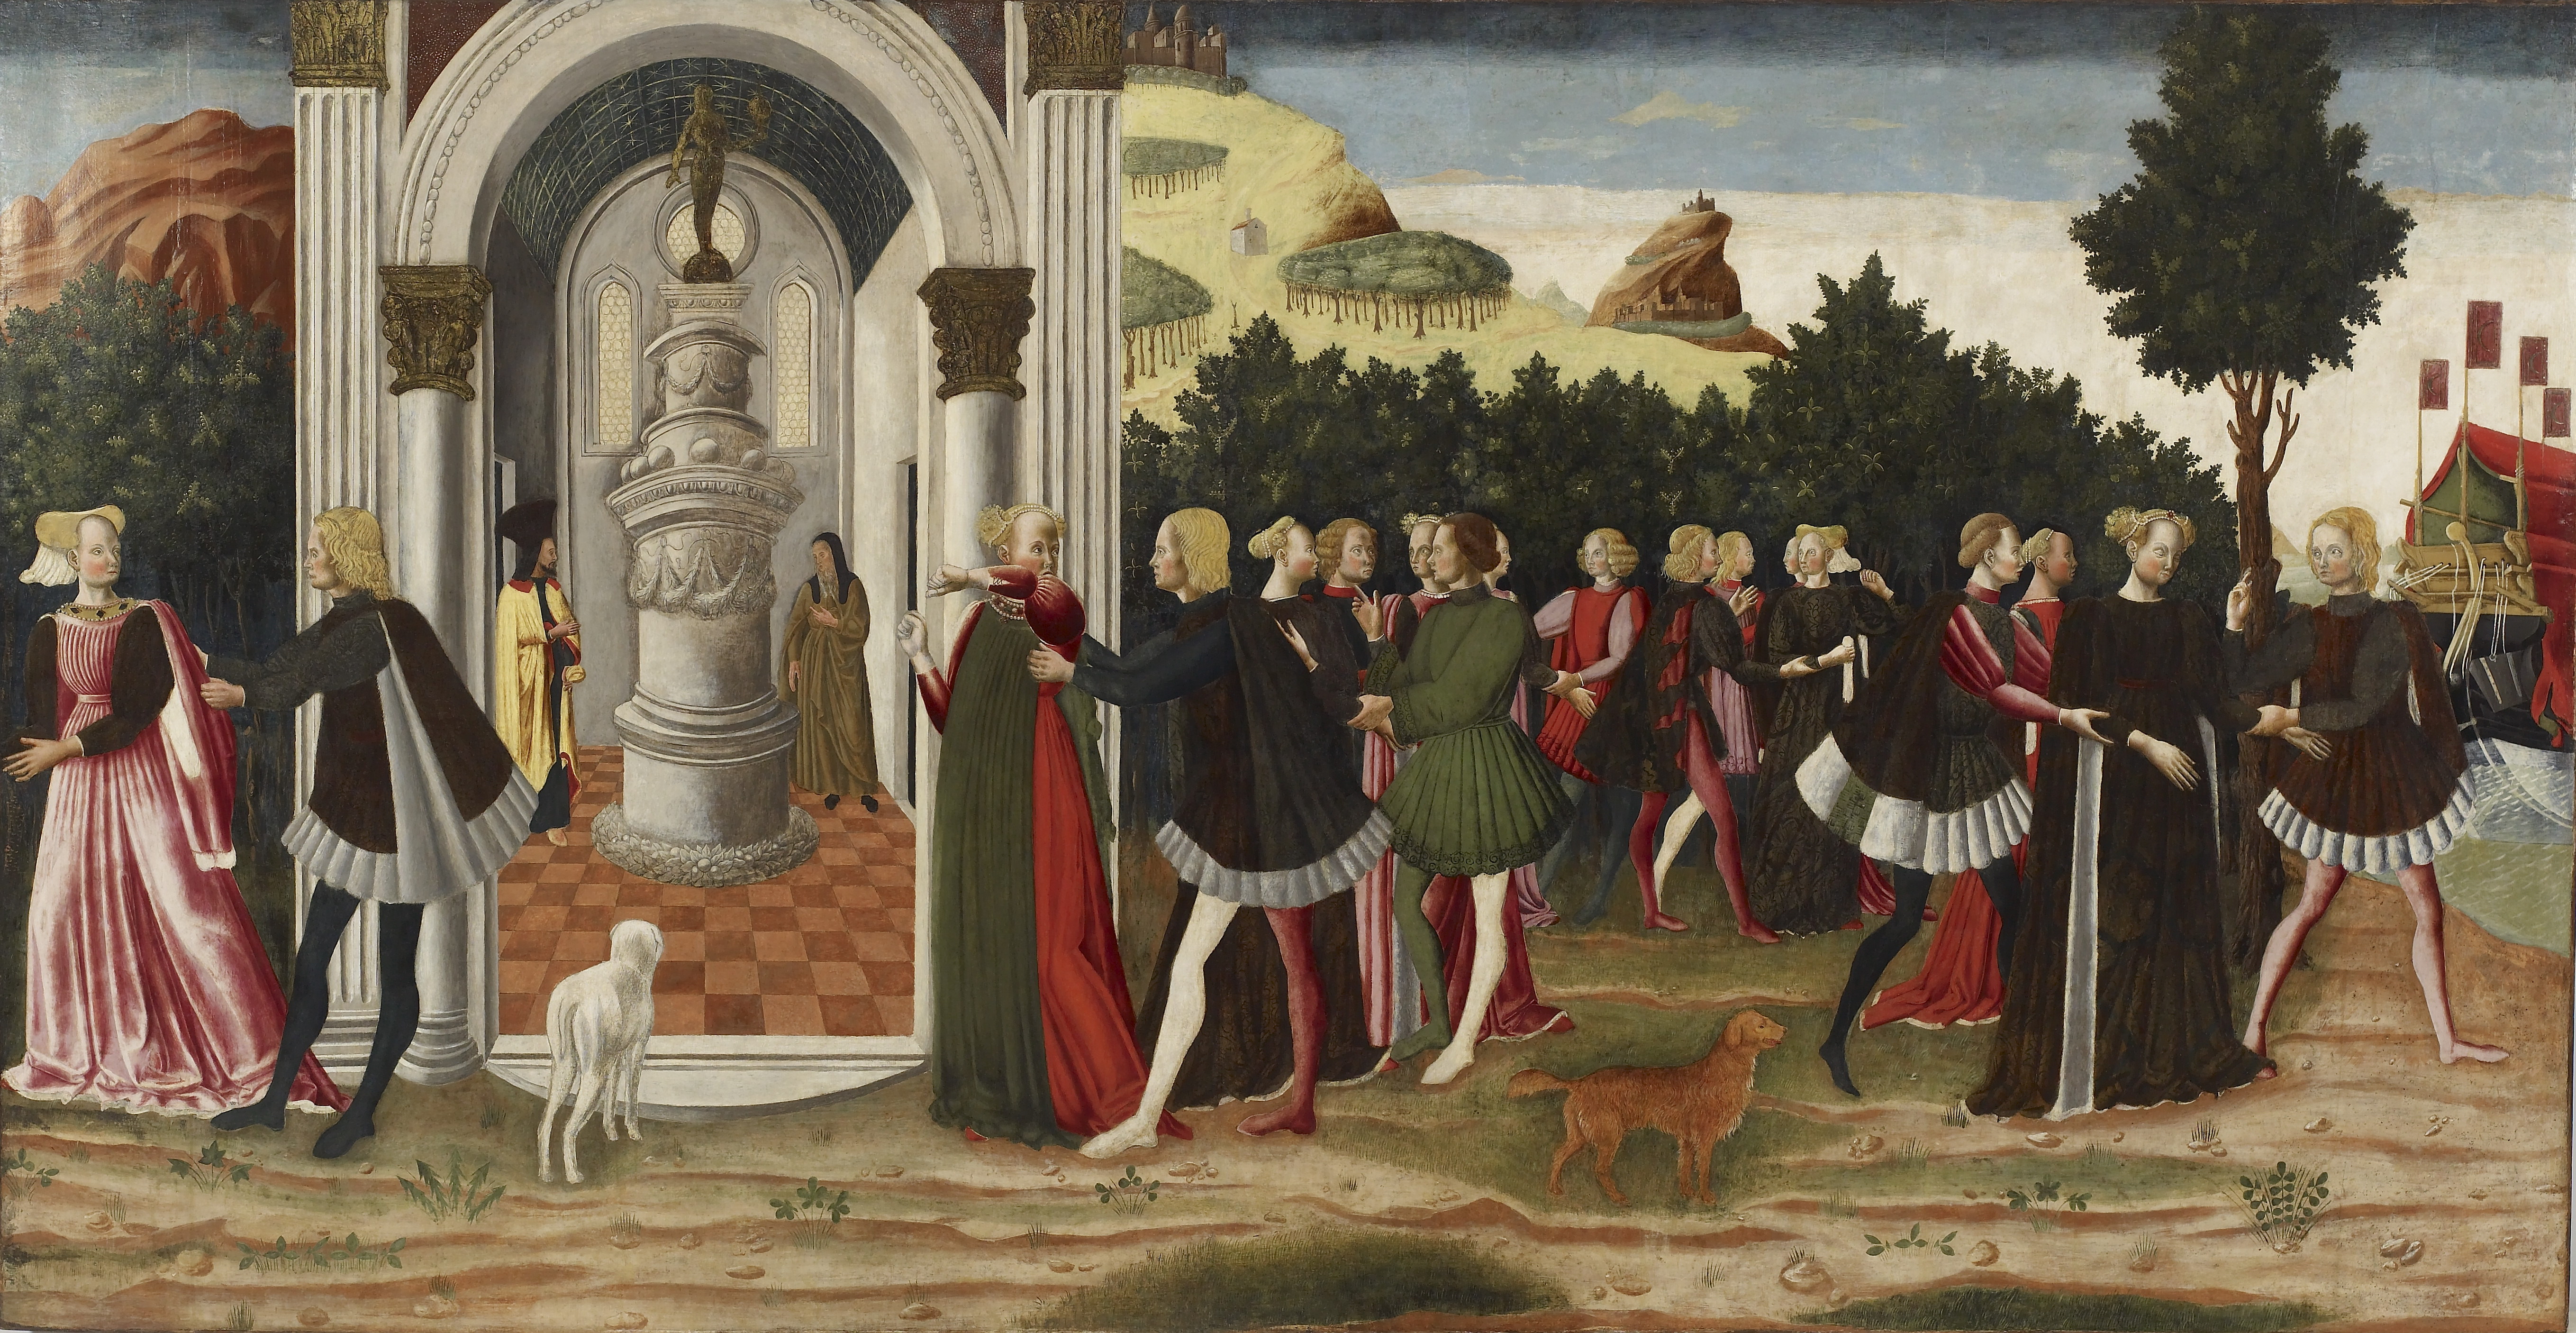 The Abduction of Helen A Monumental Series Celebrating the Wedding of Caterina Corner in 1468